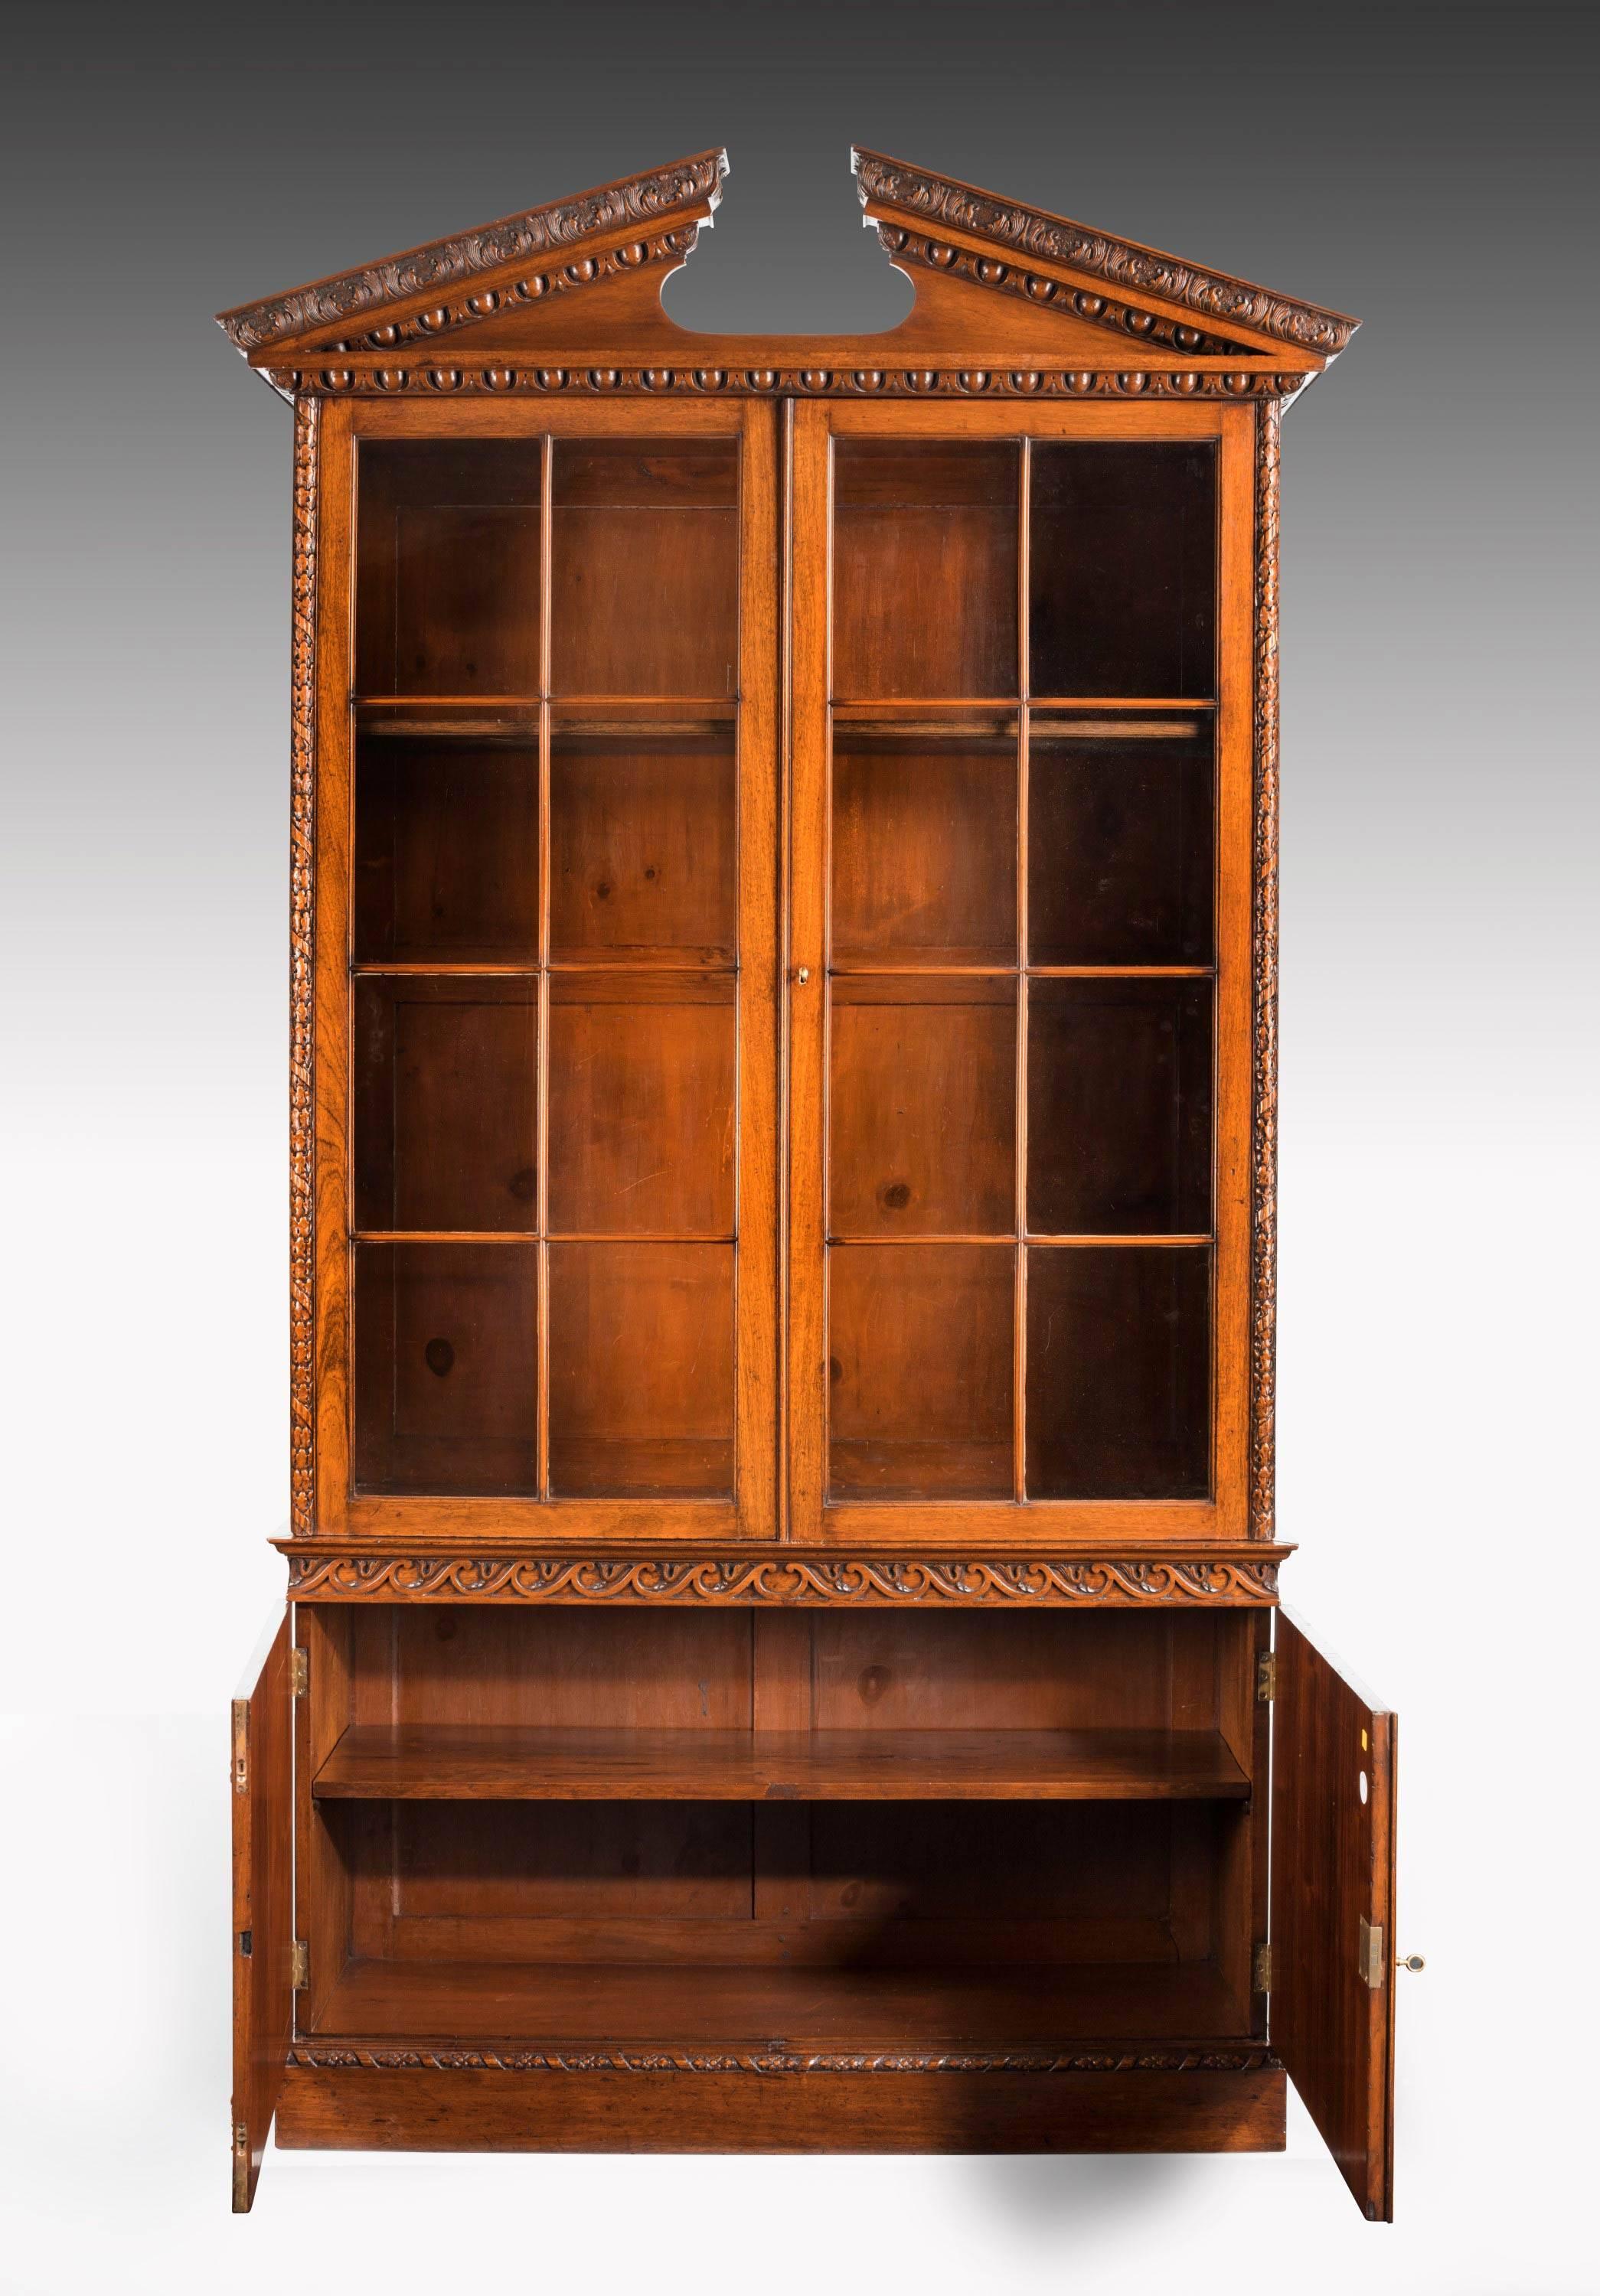 Chippendale Period Mahogany Low Waisted Bookcase In Excellent Condition For Sale In Peterborough, Northamptonshire